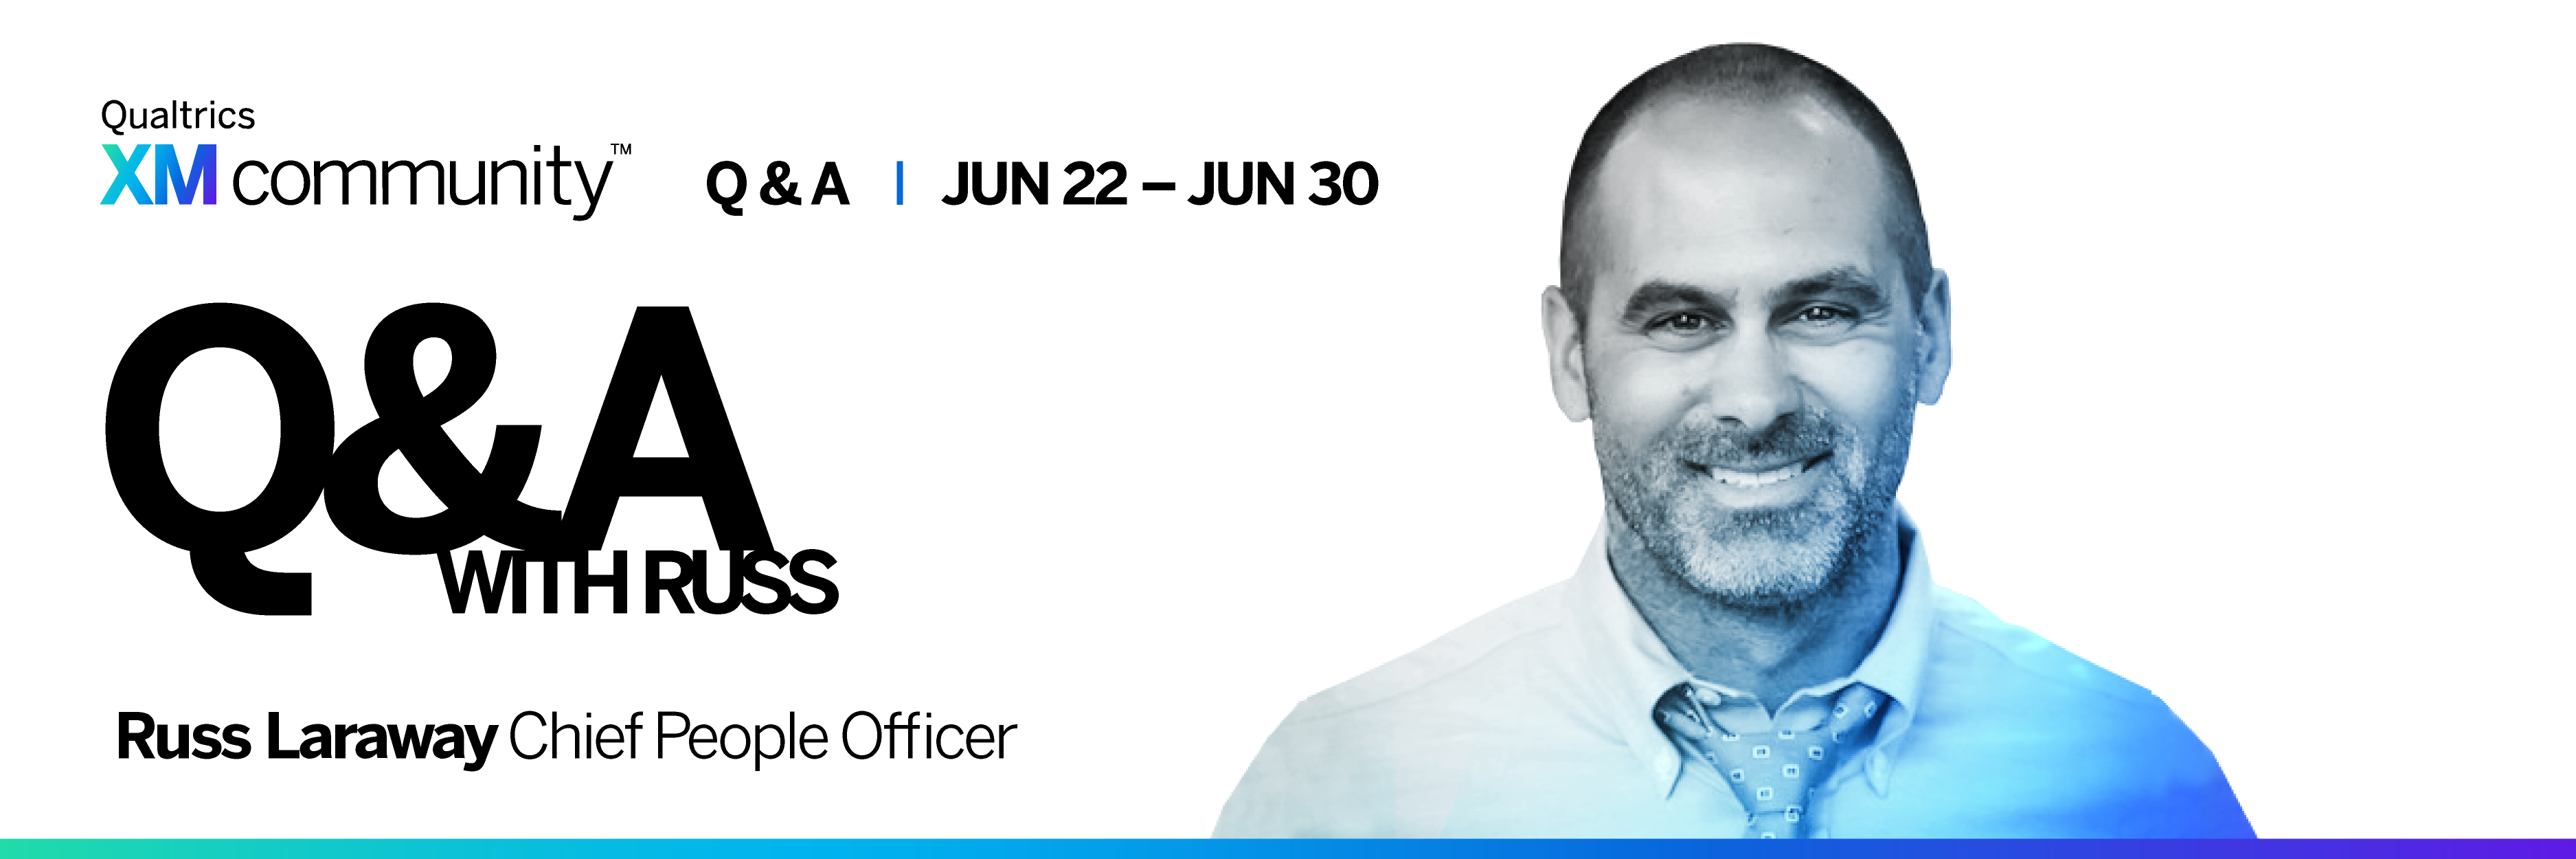 XM Community Q&A June 22 - June 30 Featuring Russ Laraway, Chief People Officer